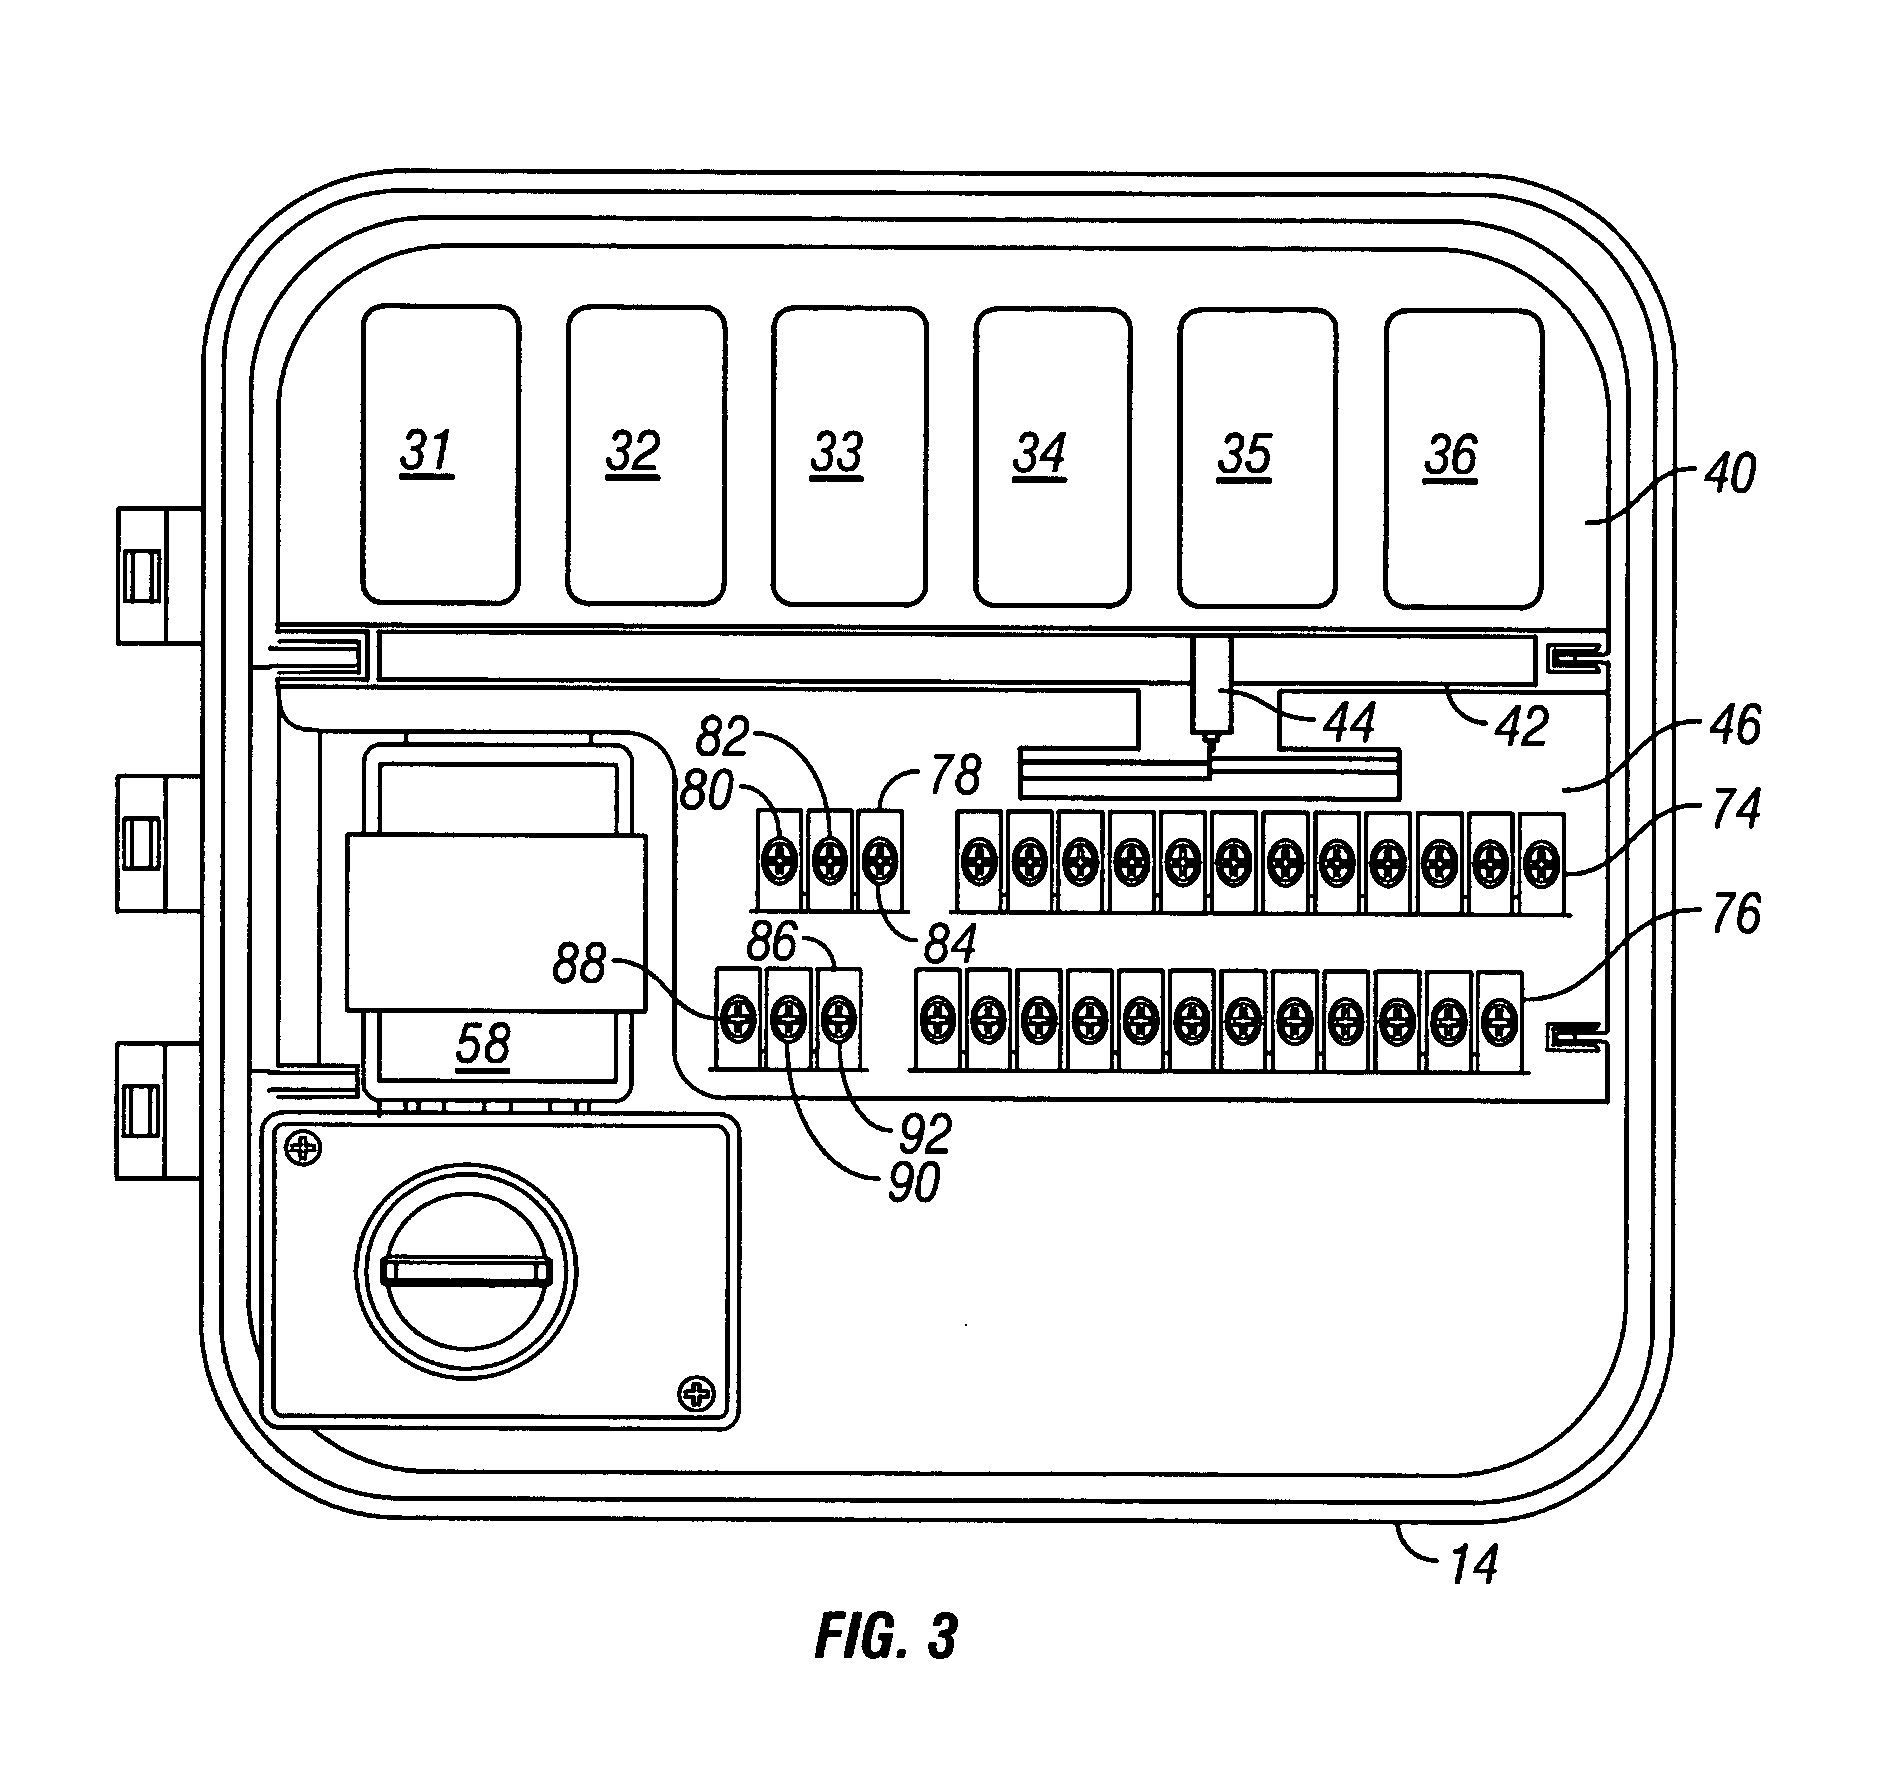 Modular irrigation controller with separate field valve line wiring terminals